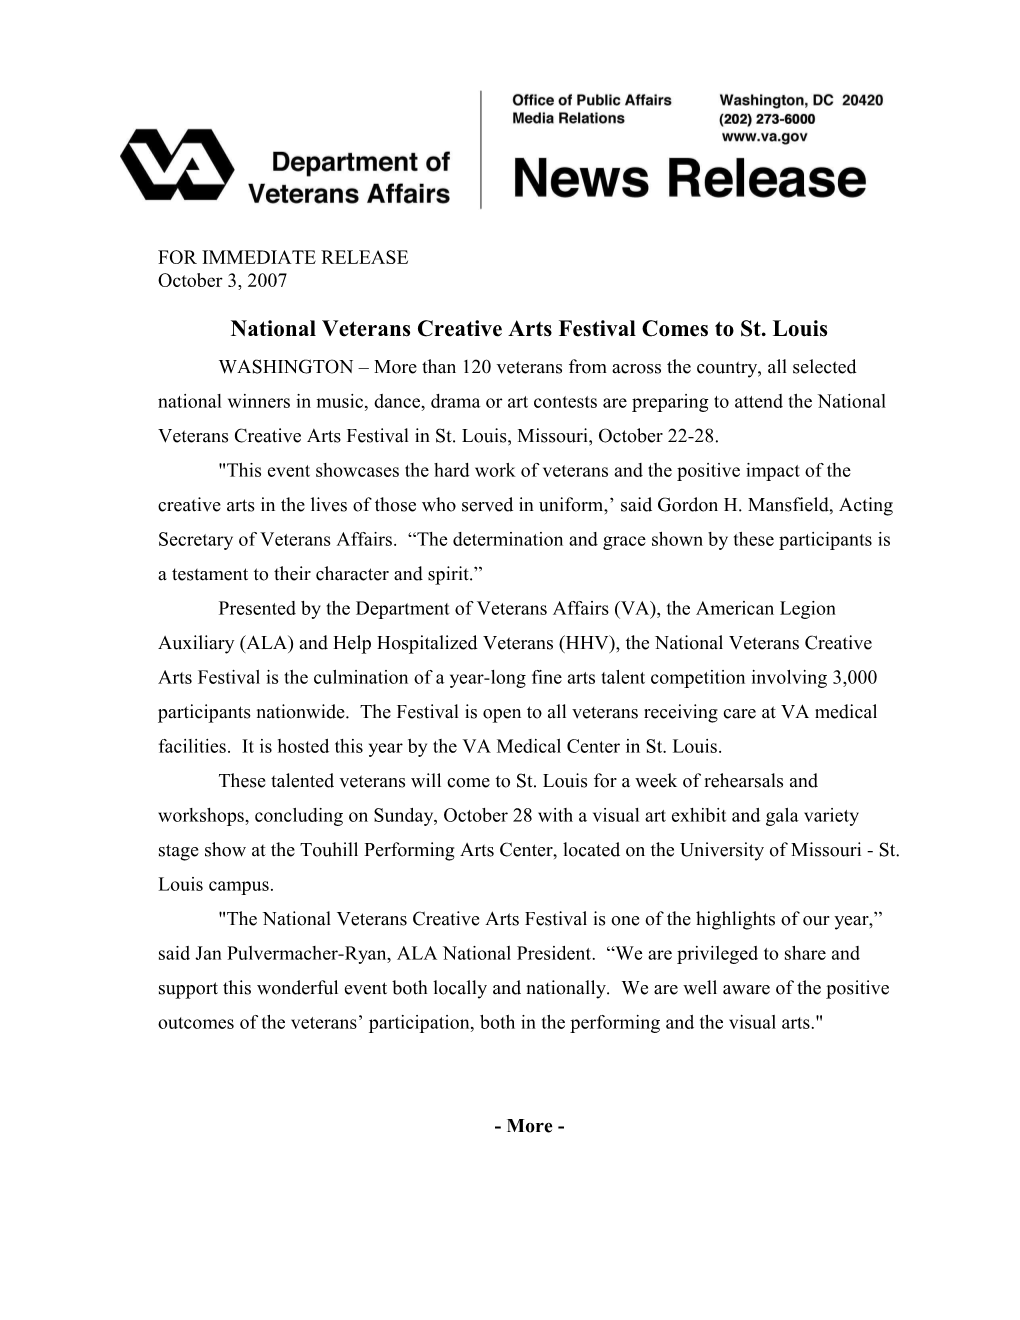 National Veterans Creative Arts Festival Comes to St. Louis